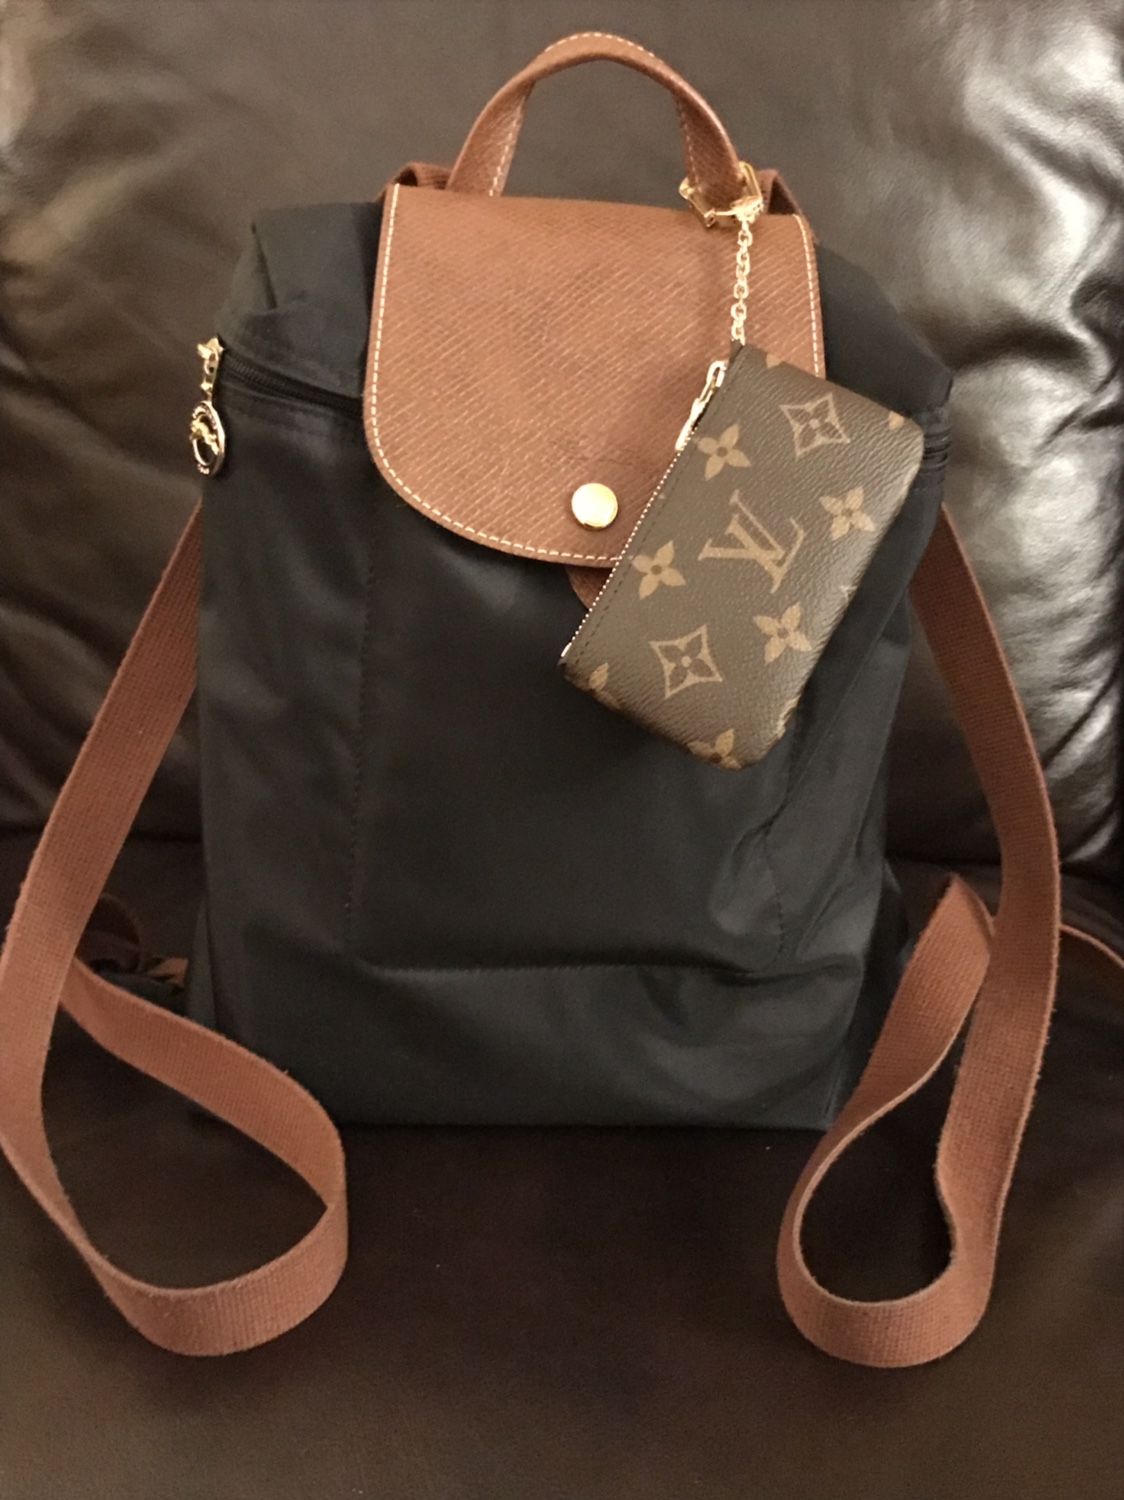 Mixing Louis Vuitton with other as | PurseForum